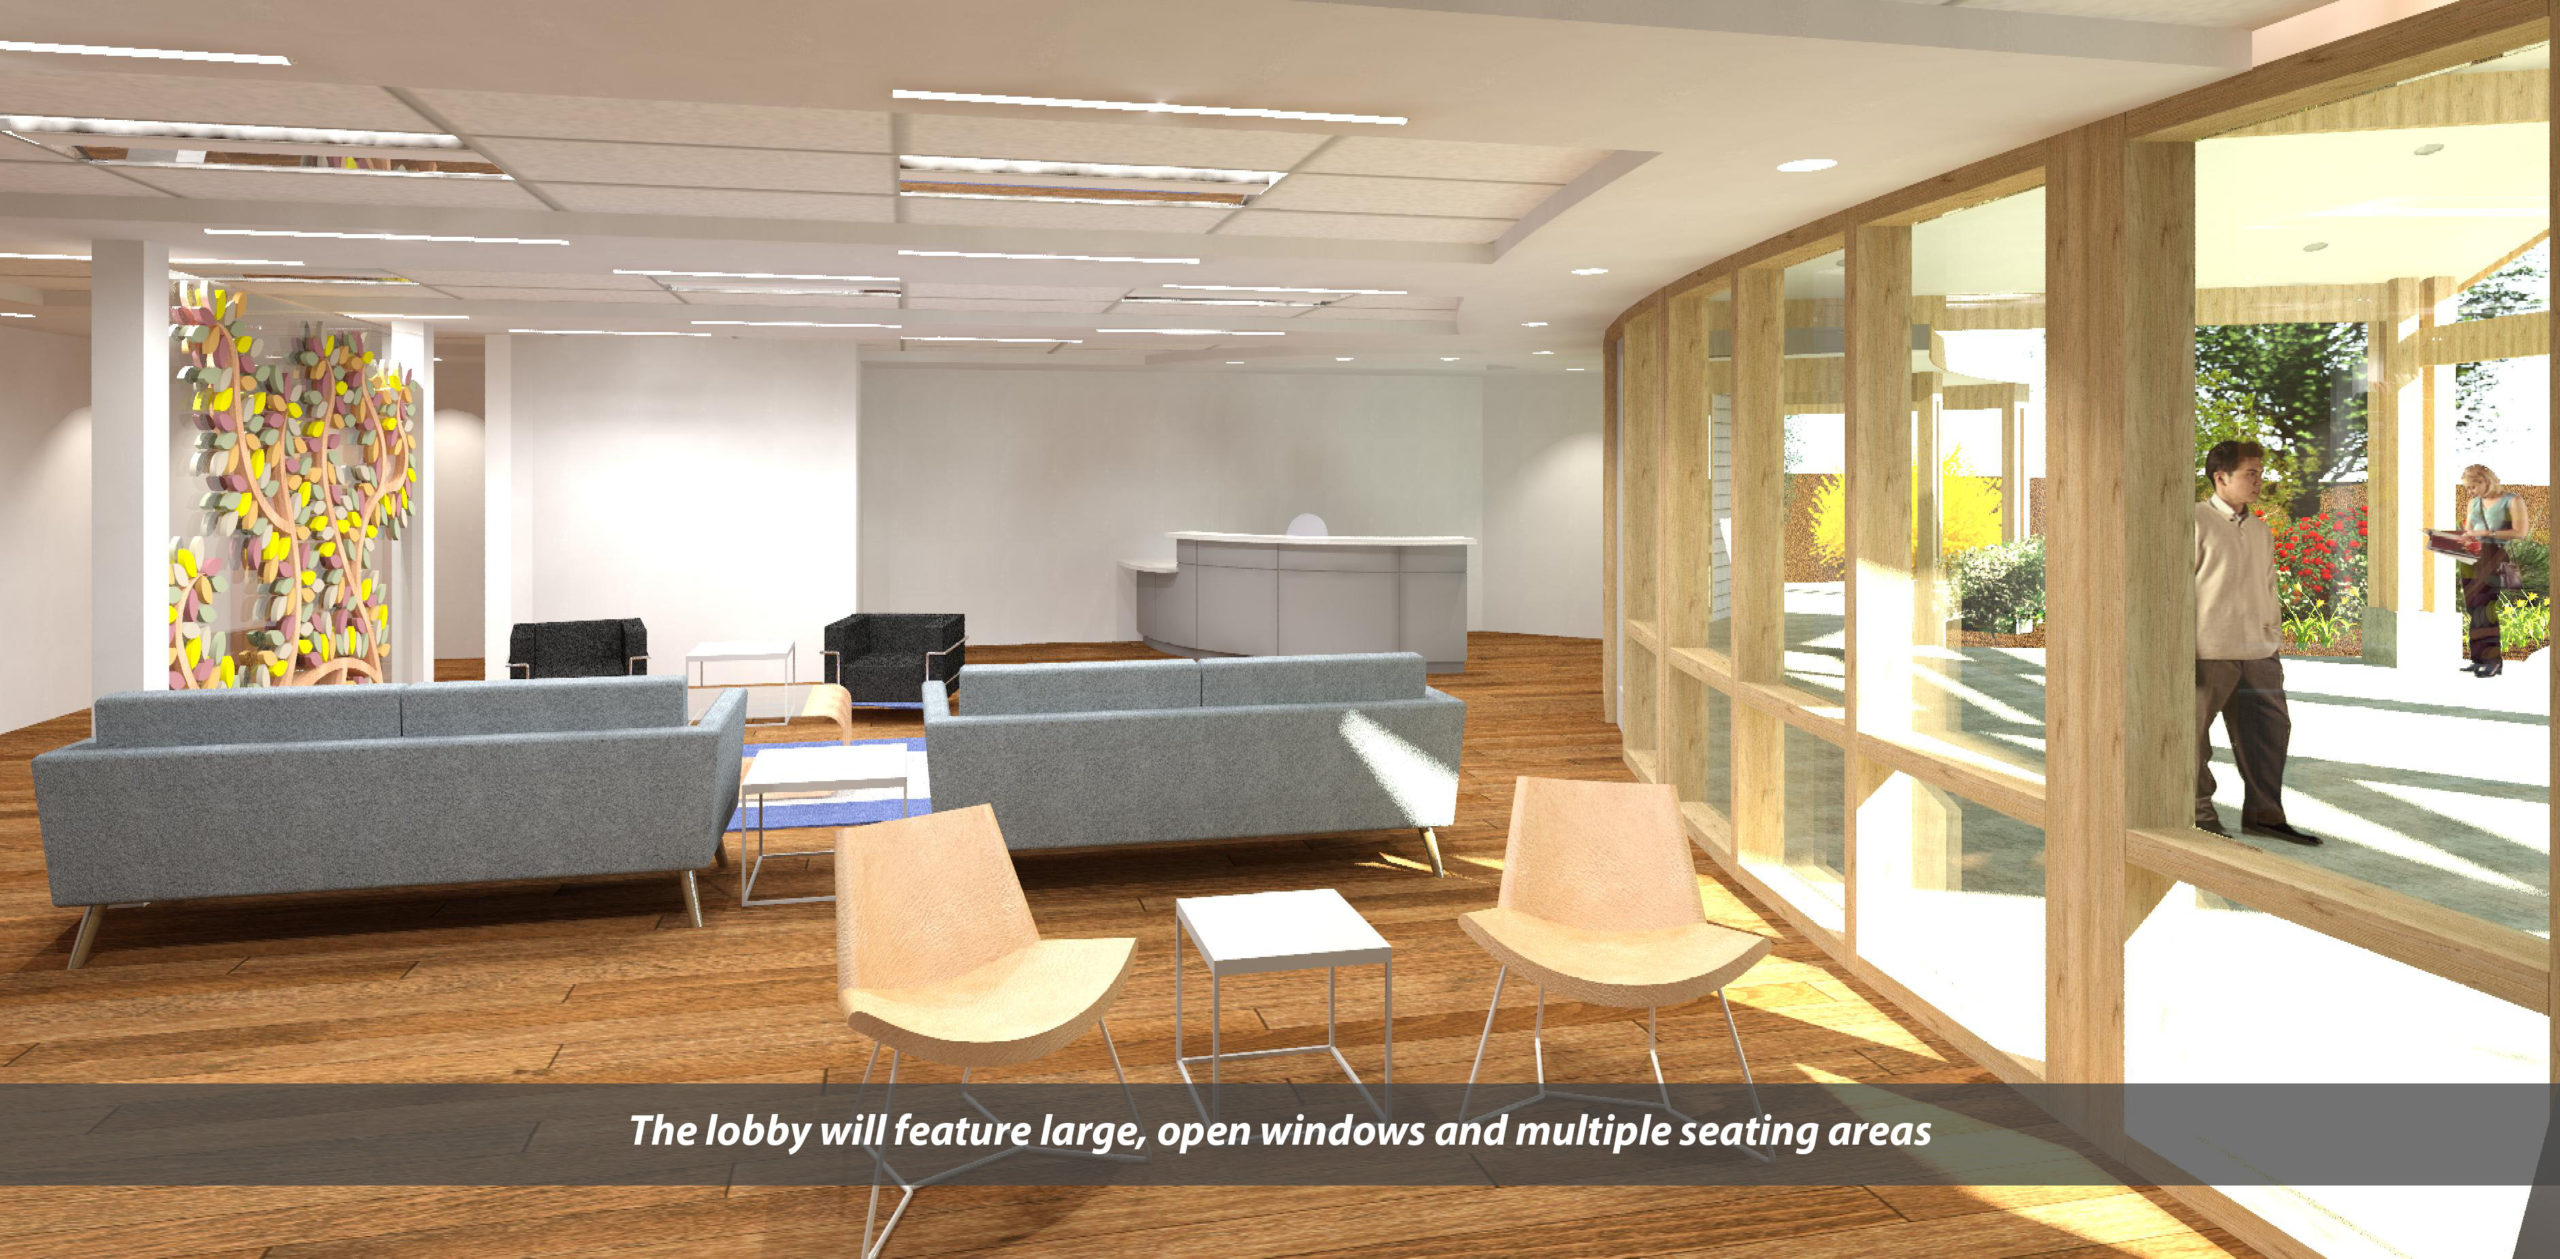 3-D rendering: The lobby will feature large, open windows and multiple seating areas